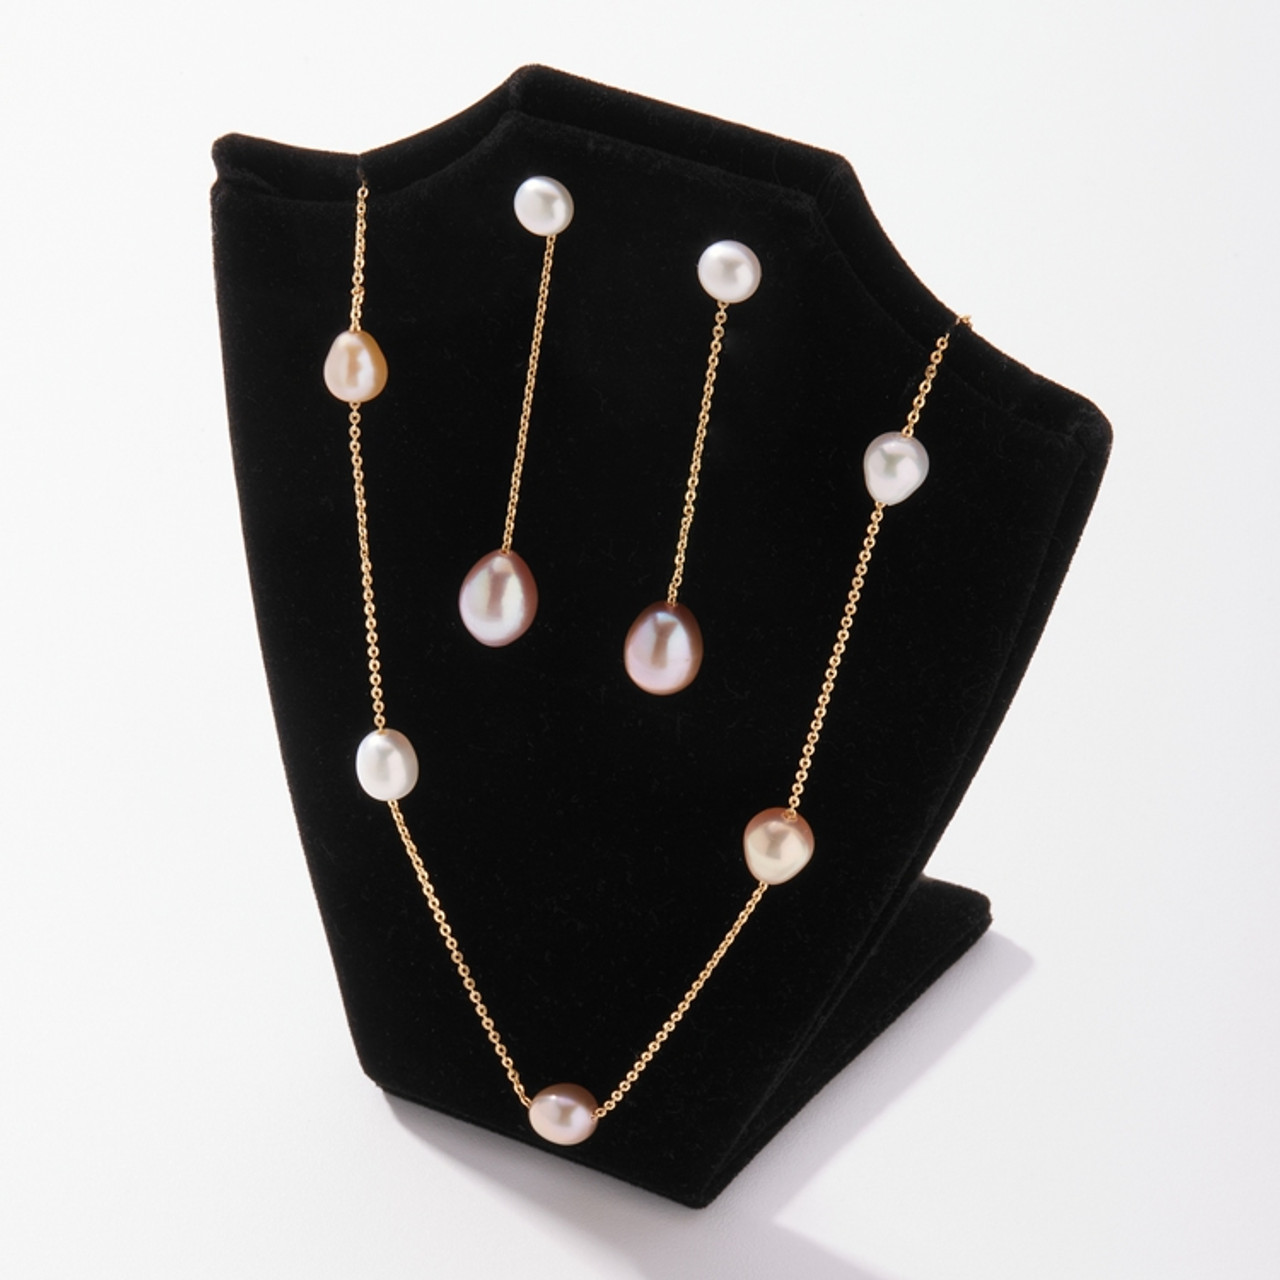 Round-pearl-necklace-earrings-set - Made In West Cork